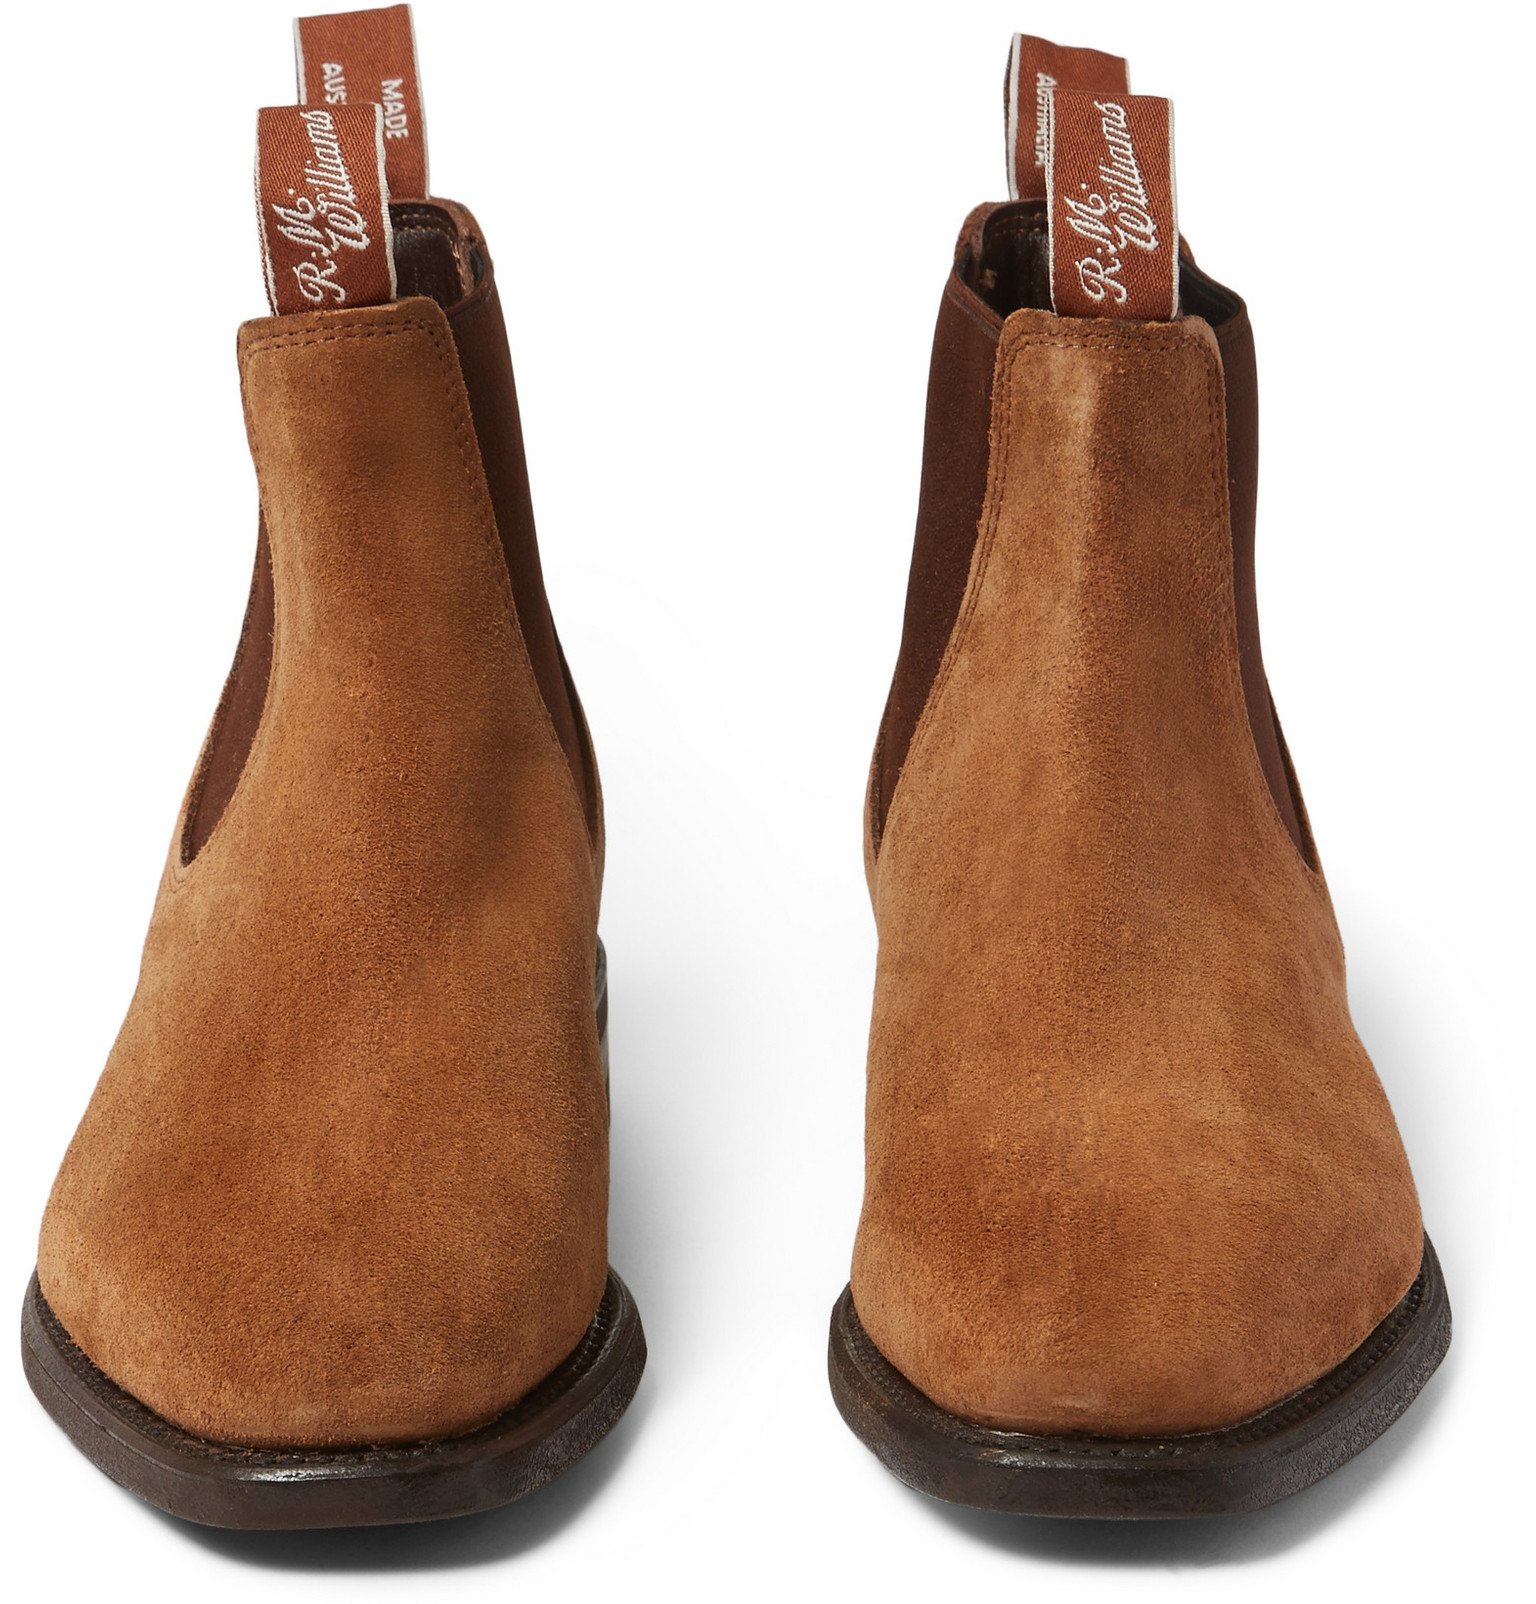 R.M. Williams Suede Chelsea Boots in Brown for Men - Lyst